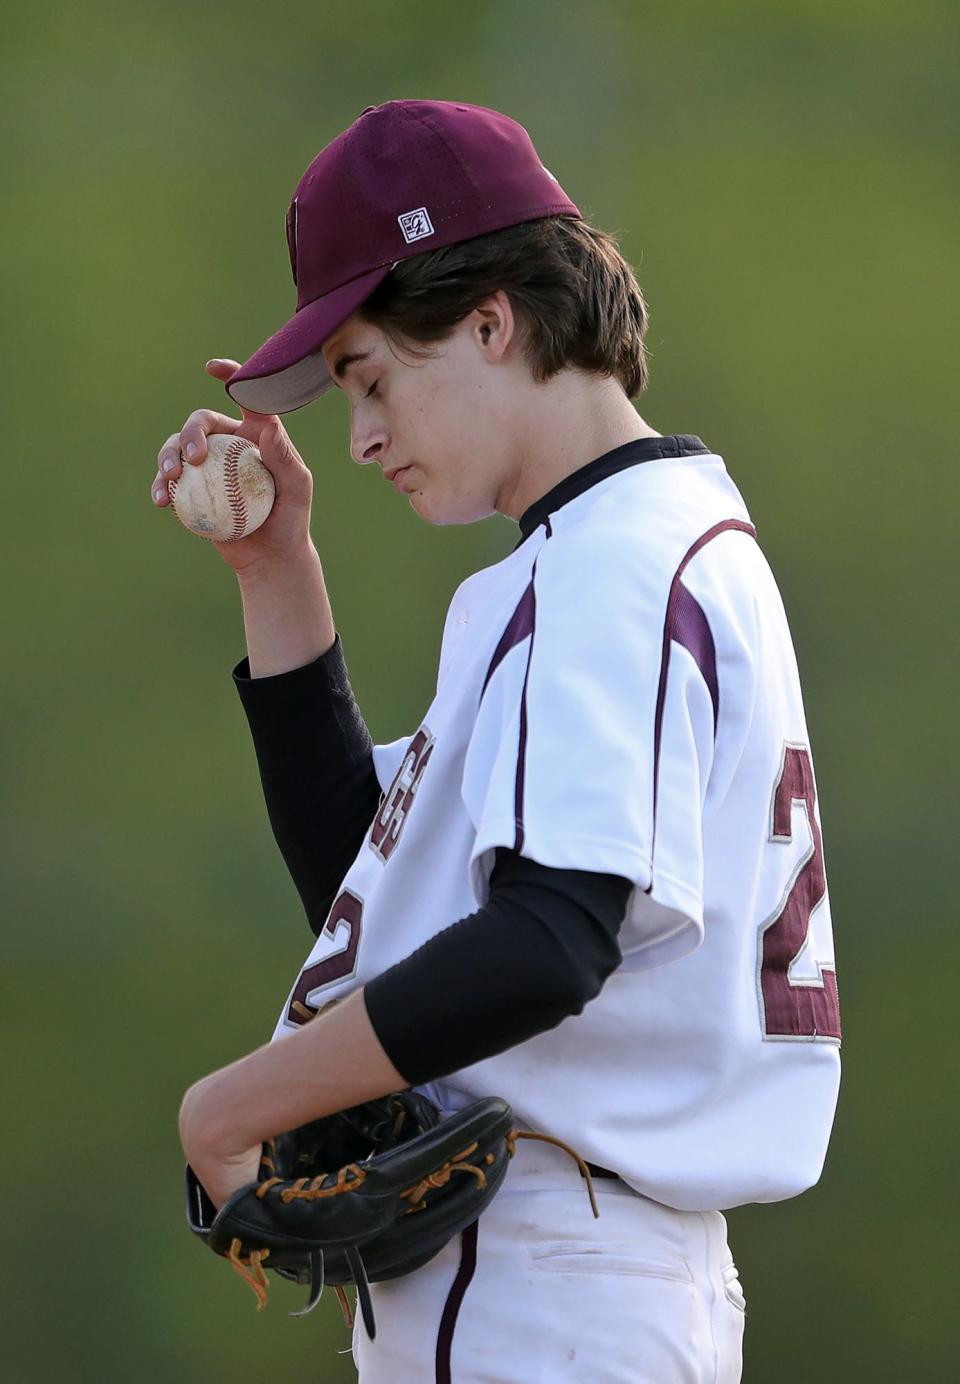 Woodridge starting pitcher Will Heisler reacts after the Coventry Comets scored run during the third inning of a baseball gam on Monday.